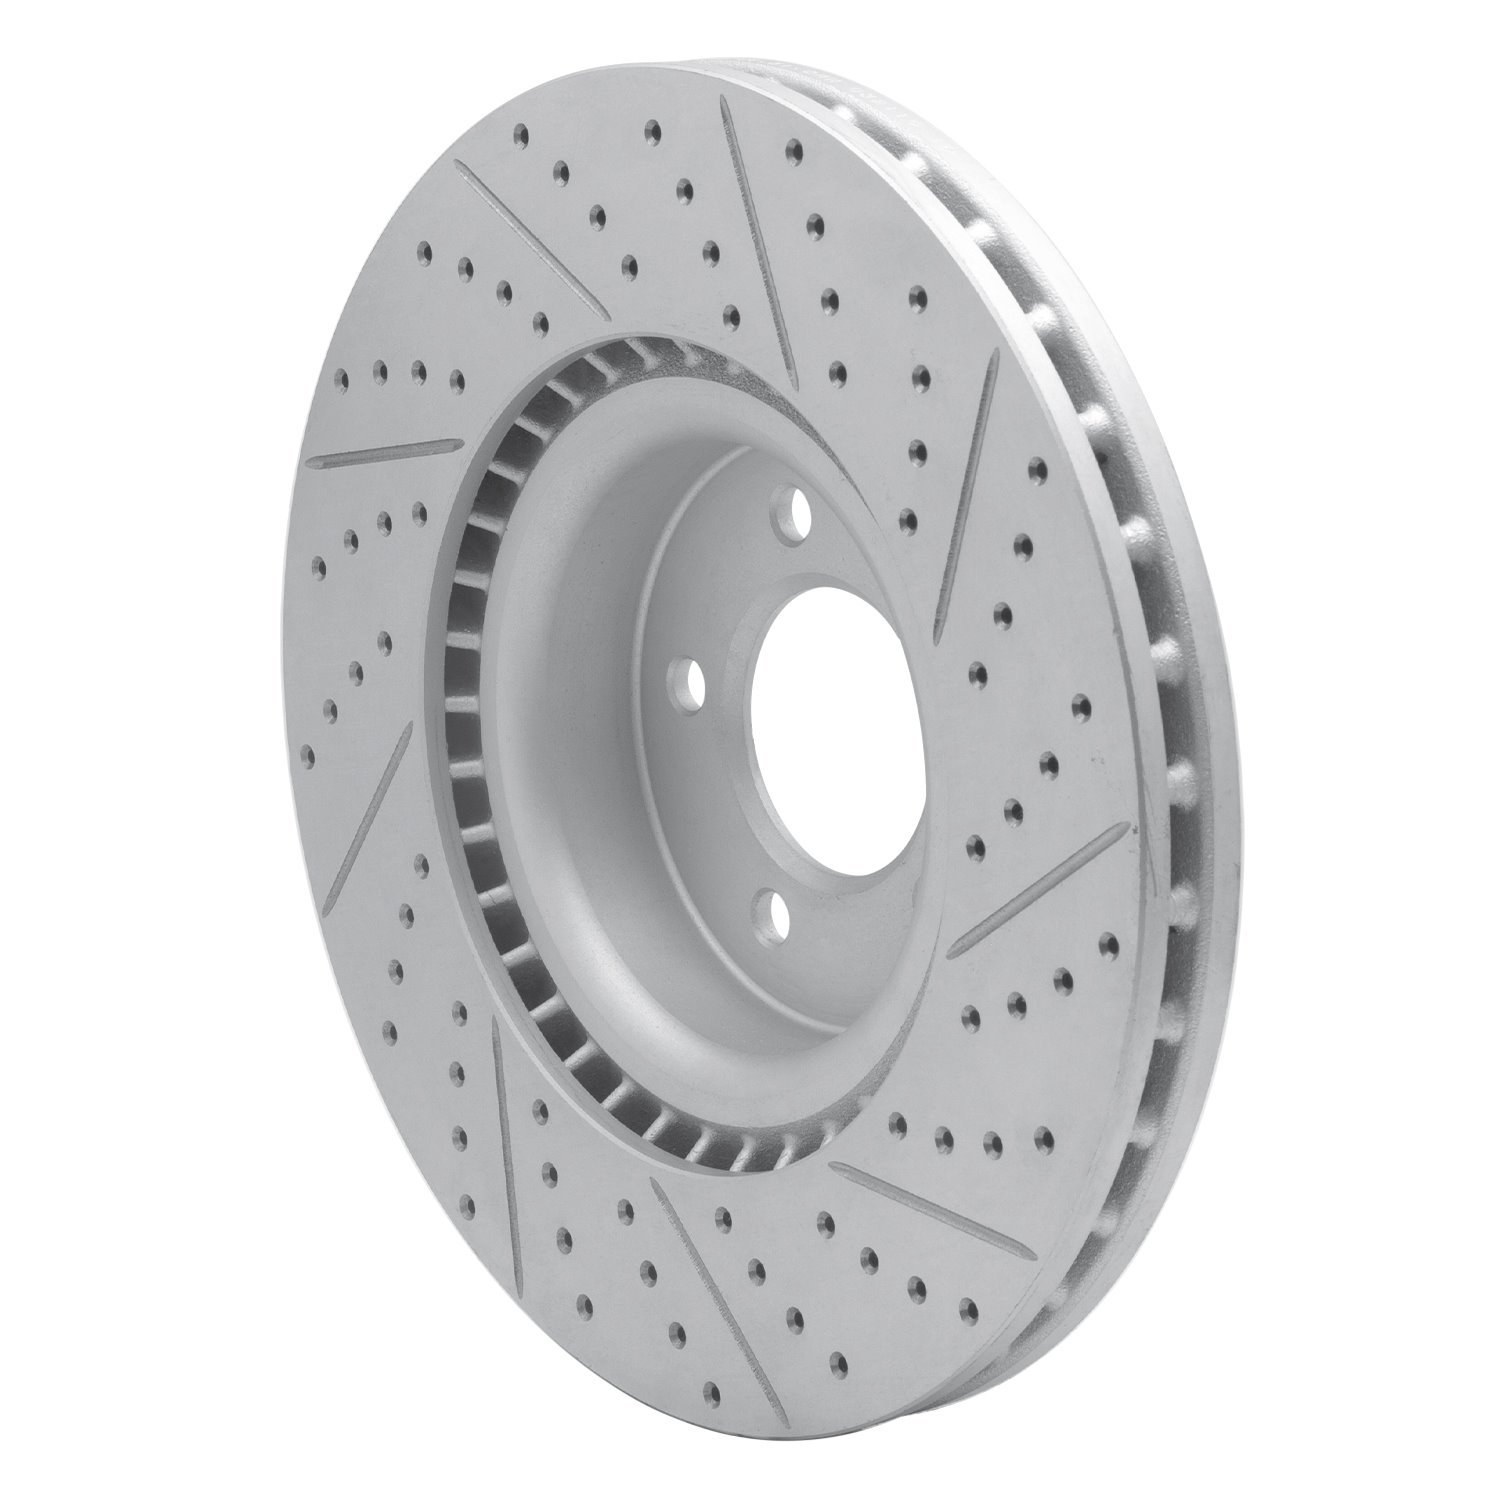 830-11032L Geoperformance Drilled/Slotted Brake Rotor, Fits Select Land Rover, Position: Front Left